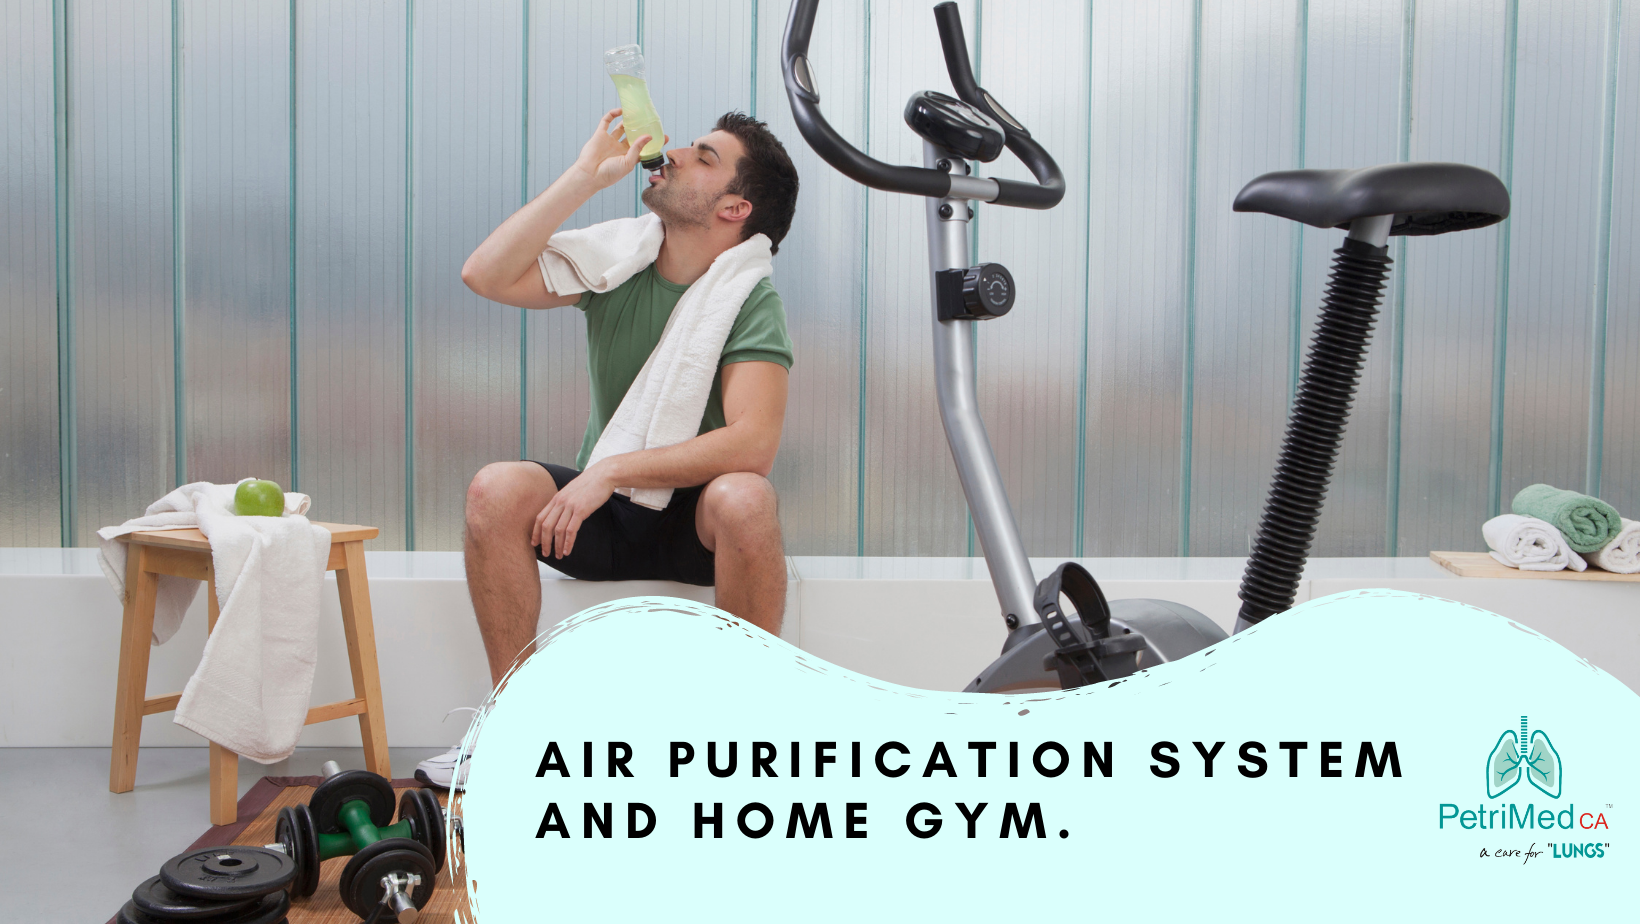 How an Air Purification System keeps the Home Gym Healthy?